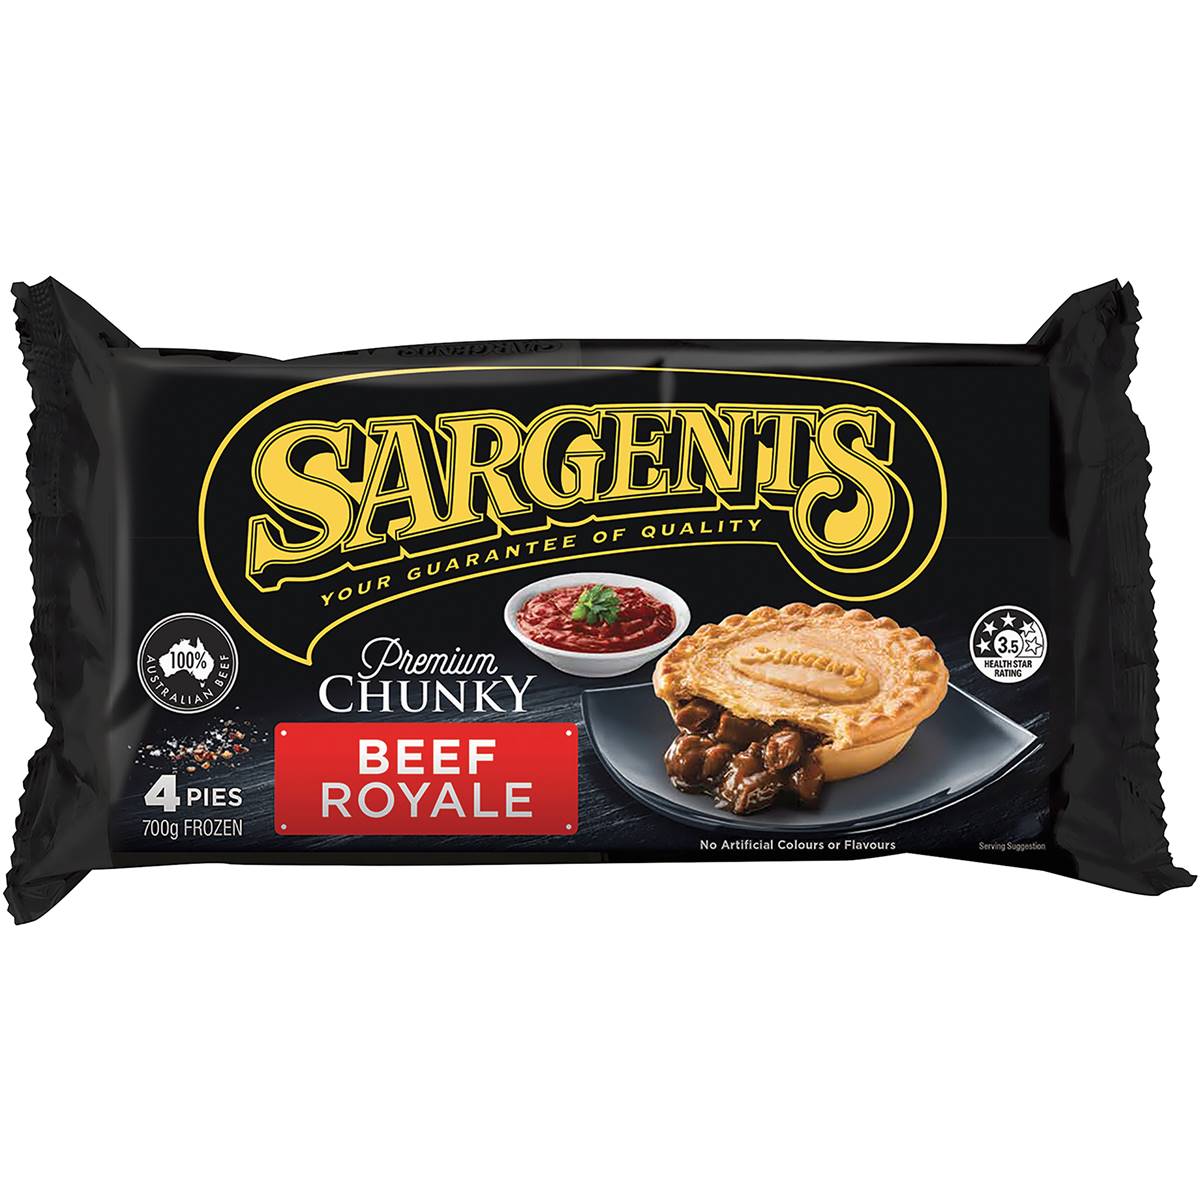 Calories in Sargents Pies Chunky Beef Royale